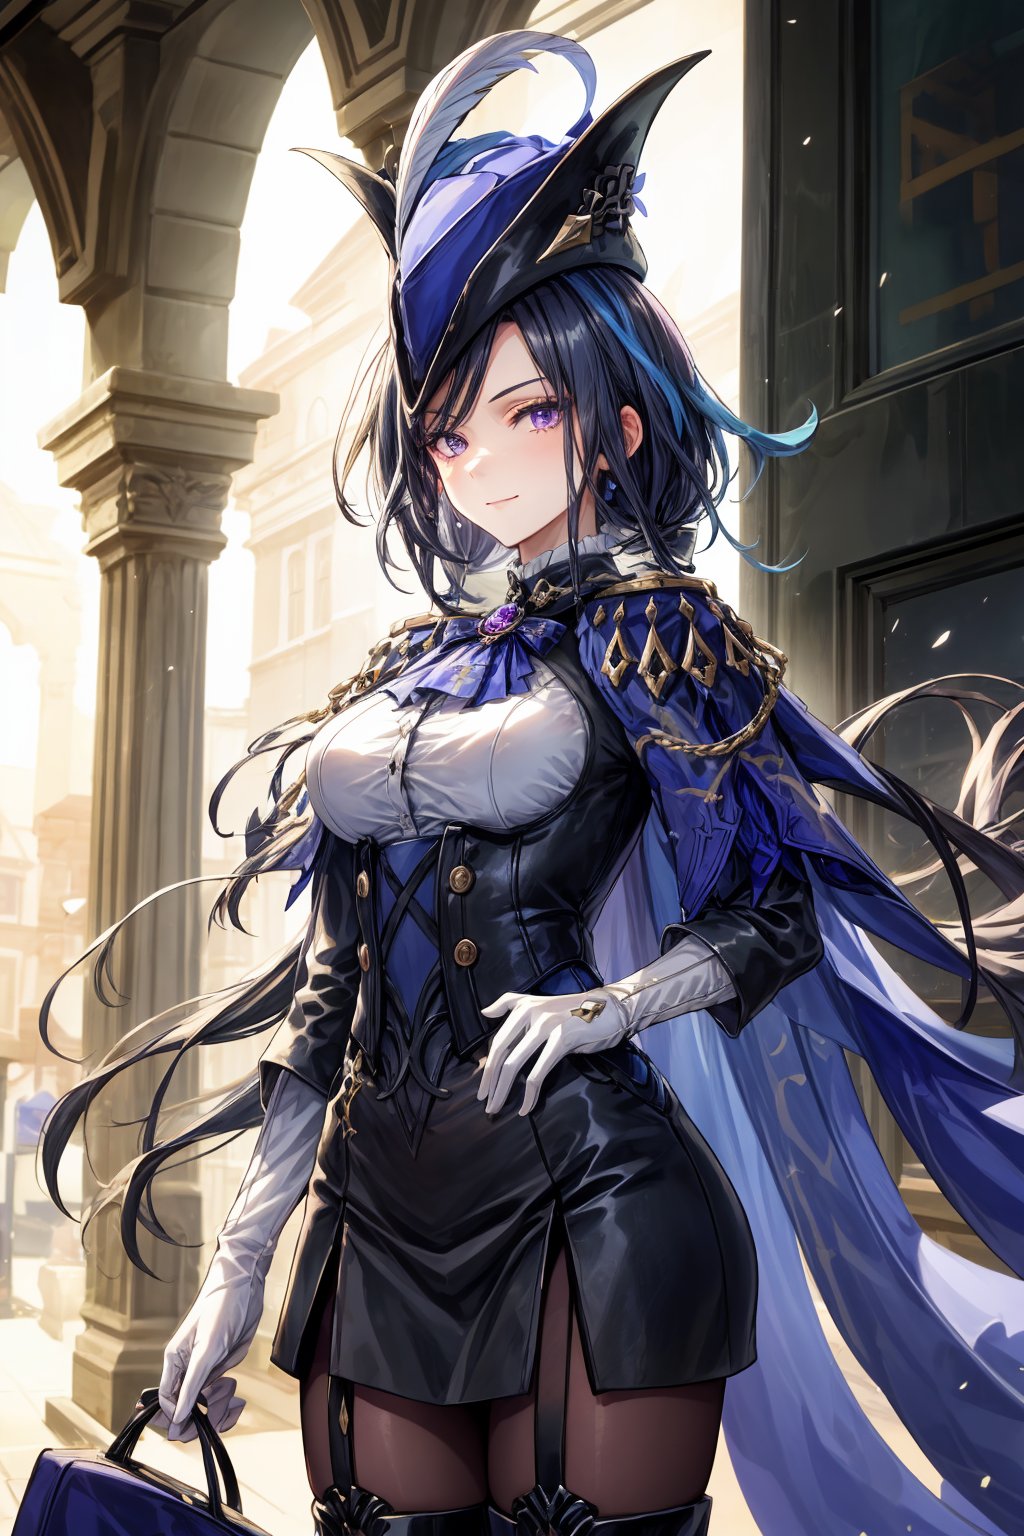 Clorinde from Genshin Impact stands confidently in a sun-drenched outdoor setting, her striking attire drawing attention. A tricorne hat adorns her deep blue hair, adorned with a hat feather, as she gazes directly at the viewer with purple eyes and a subtle smile. Her black jacket, white gloves, and black pantyhose are complemented by fold-over boots, creating a dramatic silhouette. The blue cape flowing behind her partially conceals her corset-covered breasts, adding to the mystique. Perfect lighting illuminates the simple background, highlighting Clorinde's enigmatic demeanor and captivating features.